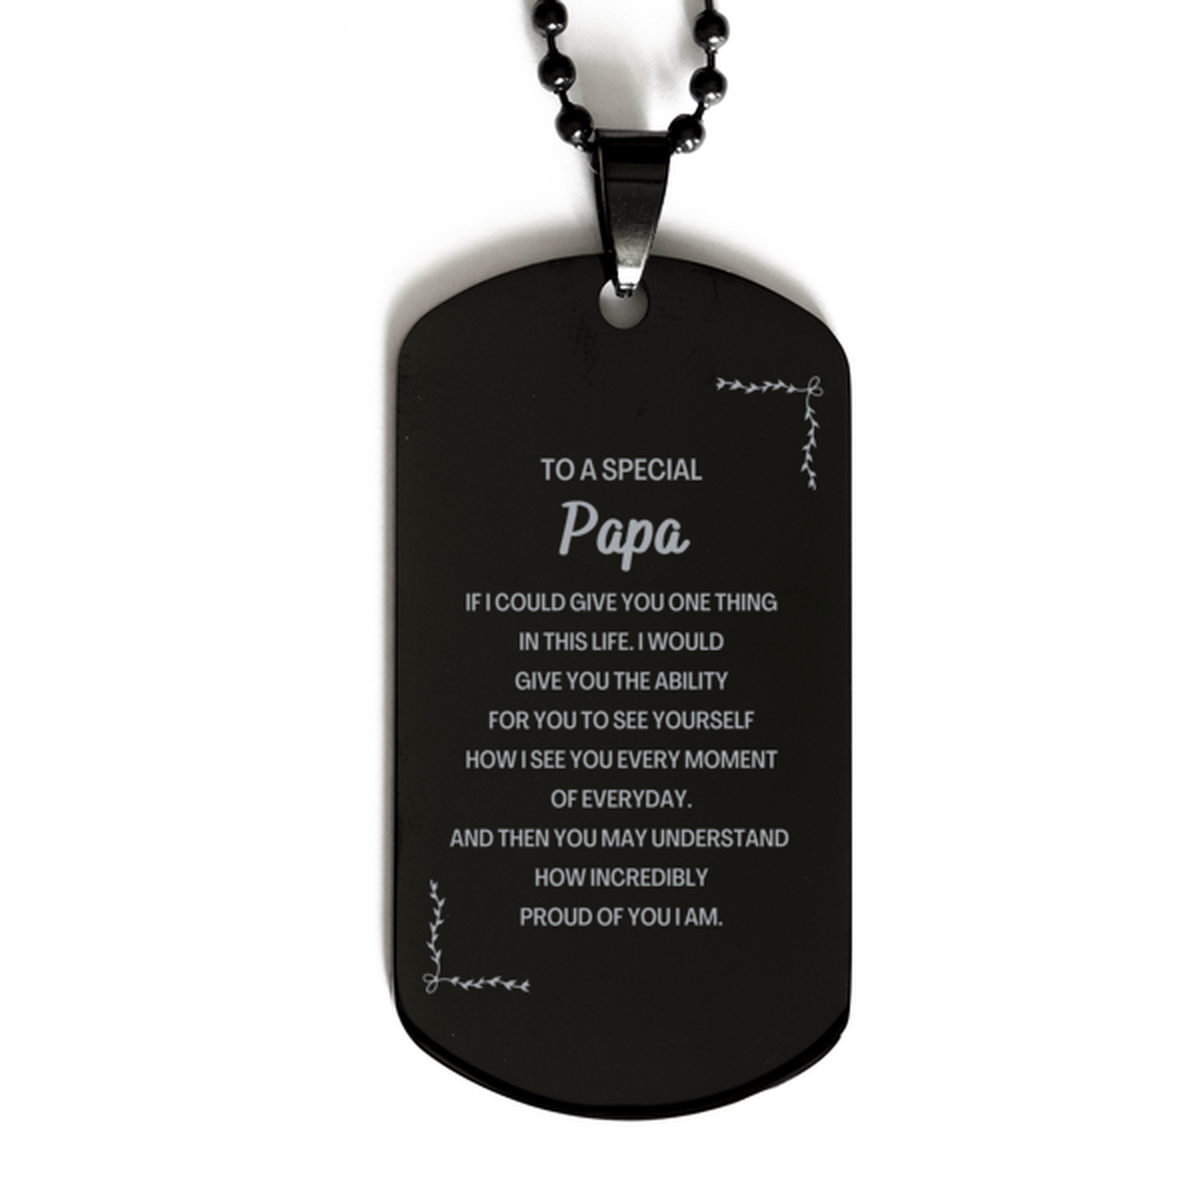 To My Papa Black Dog Tag, Gifts For Papa Engraved, Inspirational Gifts for Christmas Birthday, Epic Gifts for Papa To A Special Papa how incredibly proud of you I am